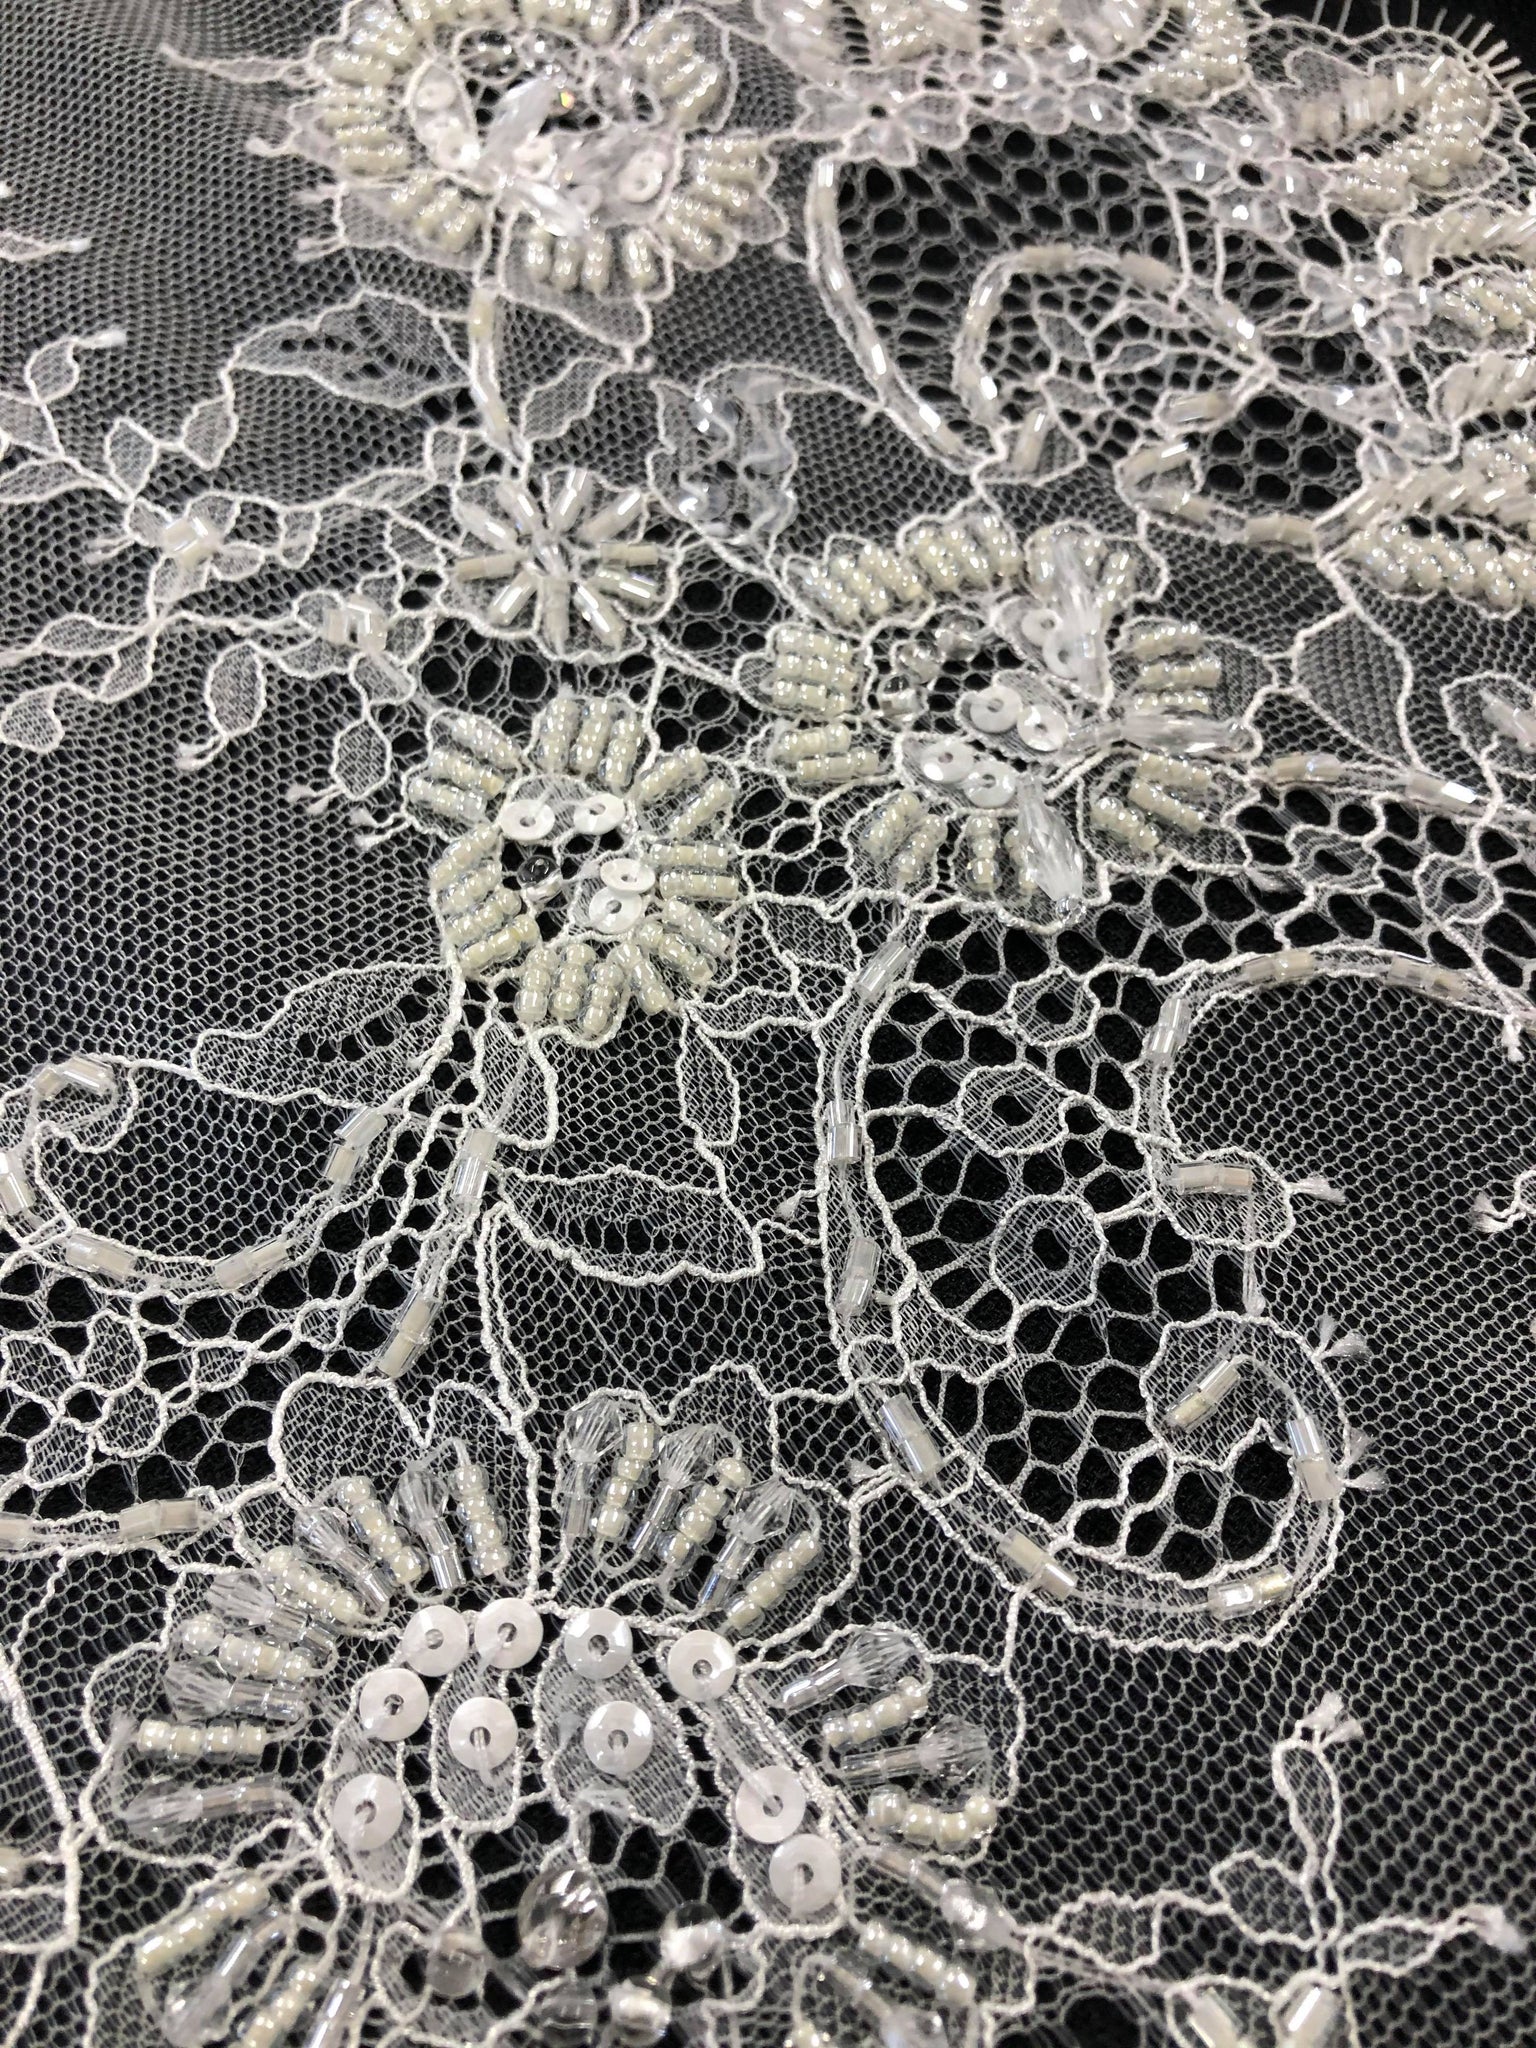 Lace fabric ivory color - Chantilly lace - lace fabric from